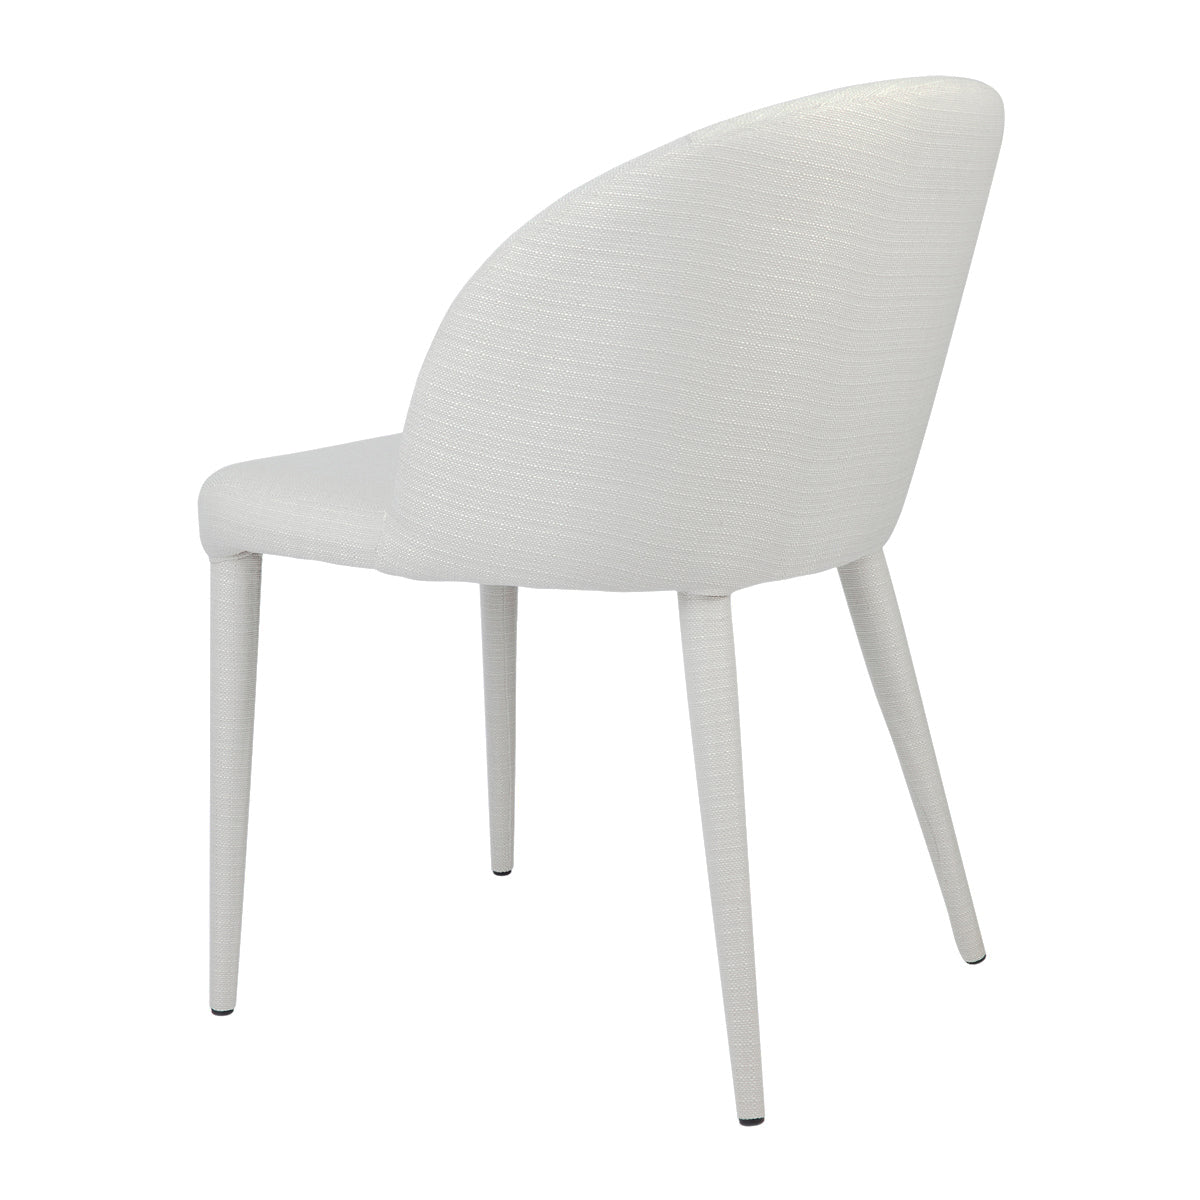 Paltrow Dining Chair - Natural